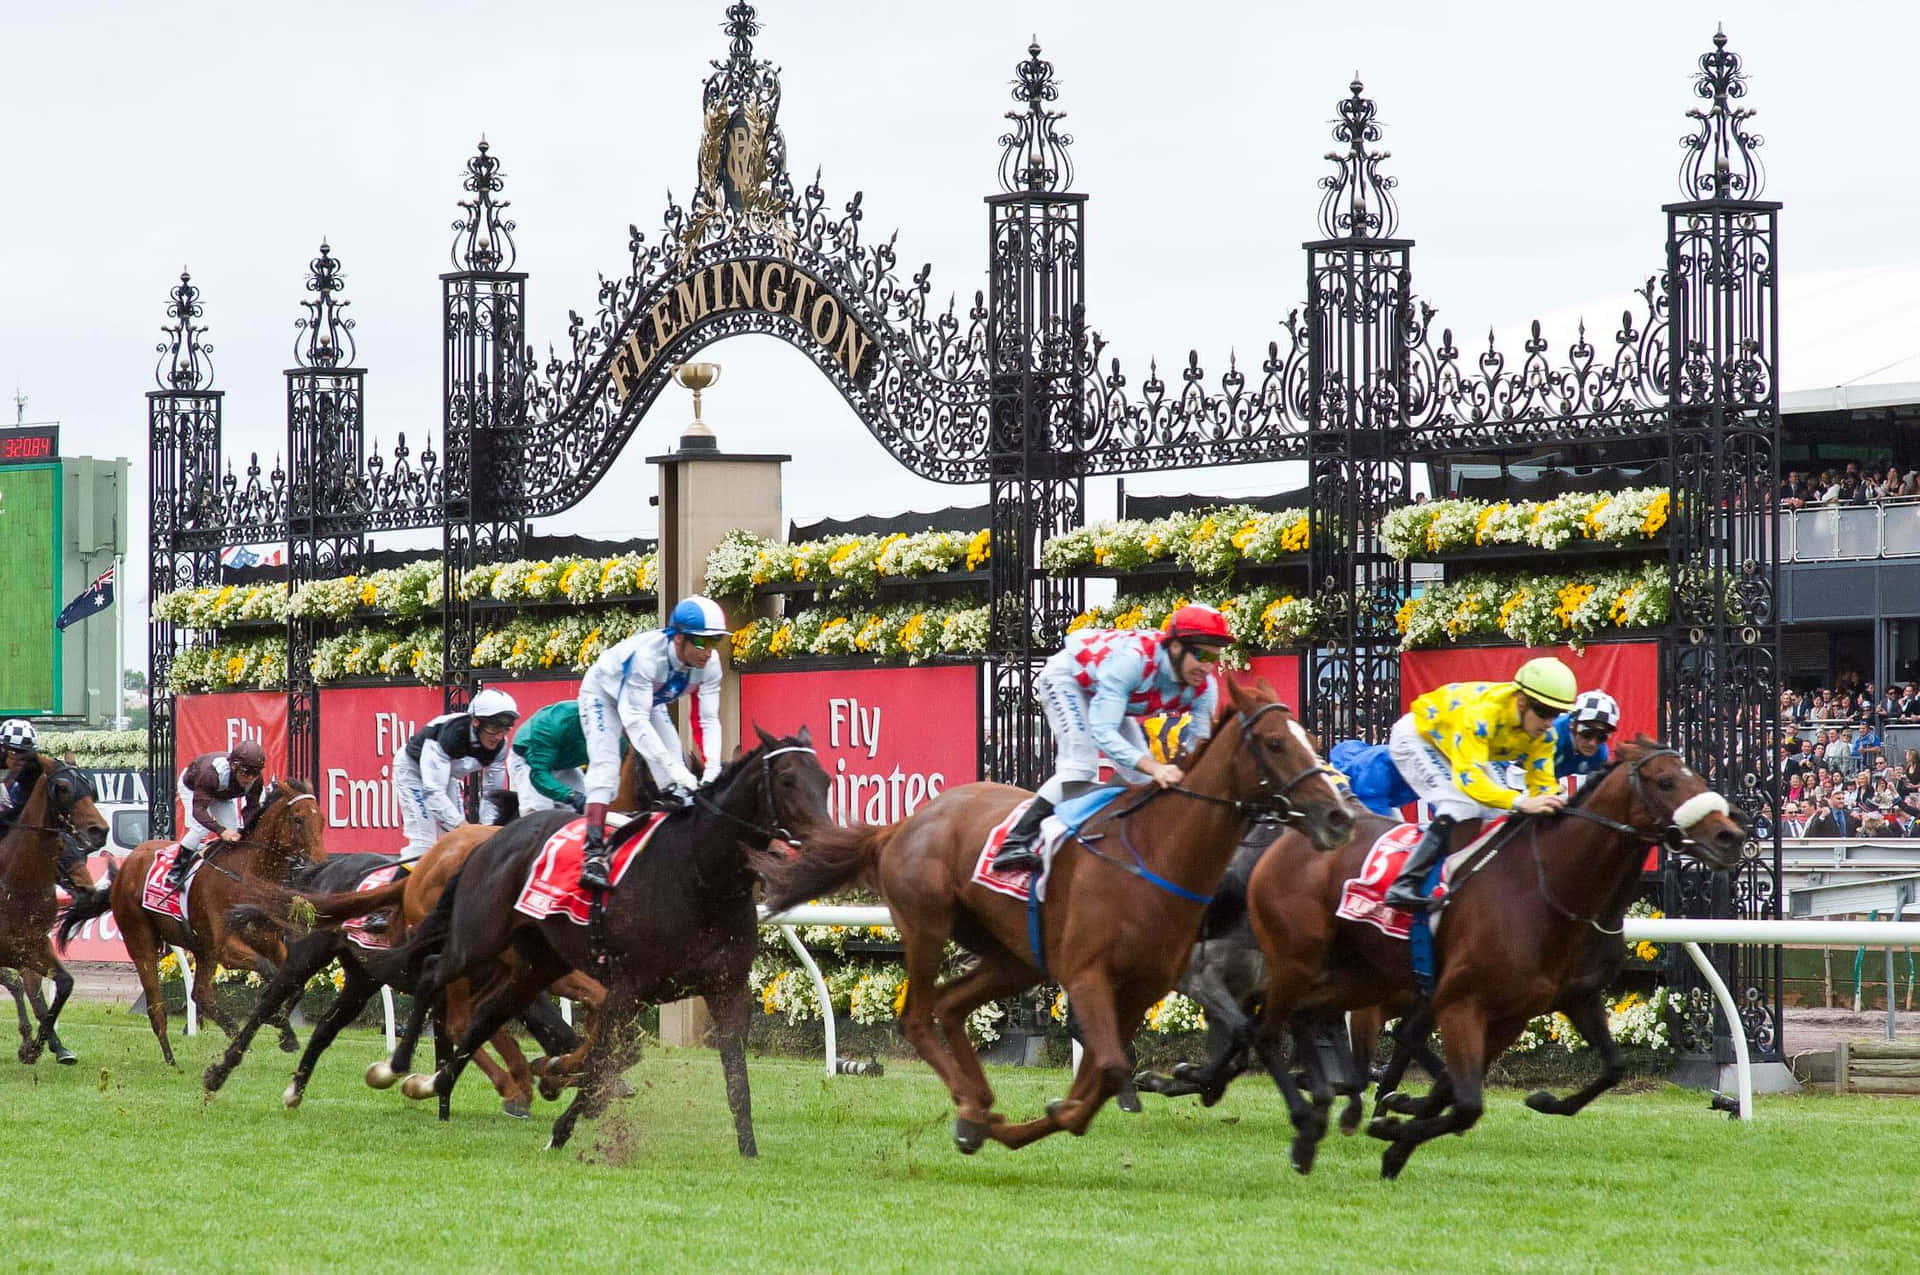 An Exciting Day At The Melbourne Cup Race Wallpaper